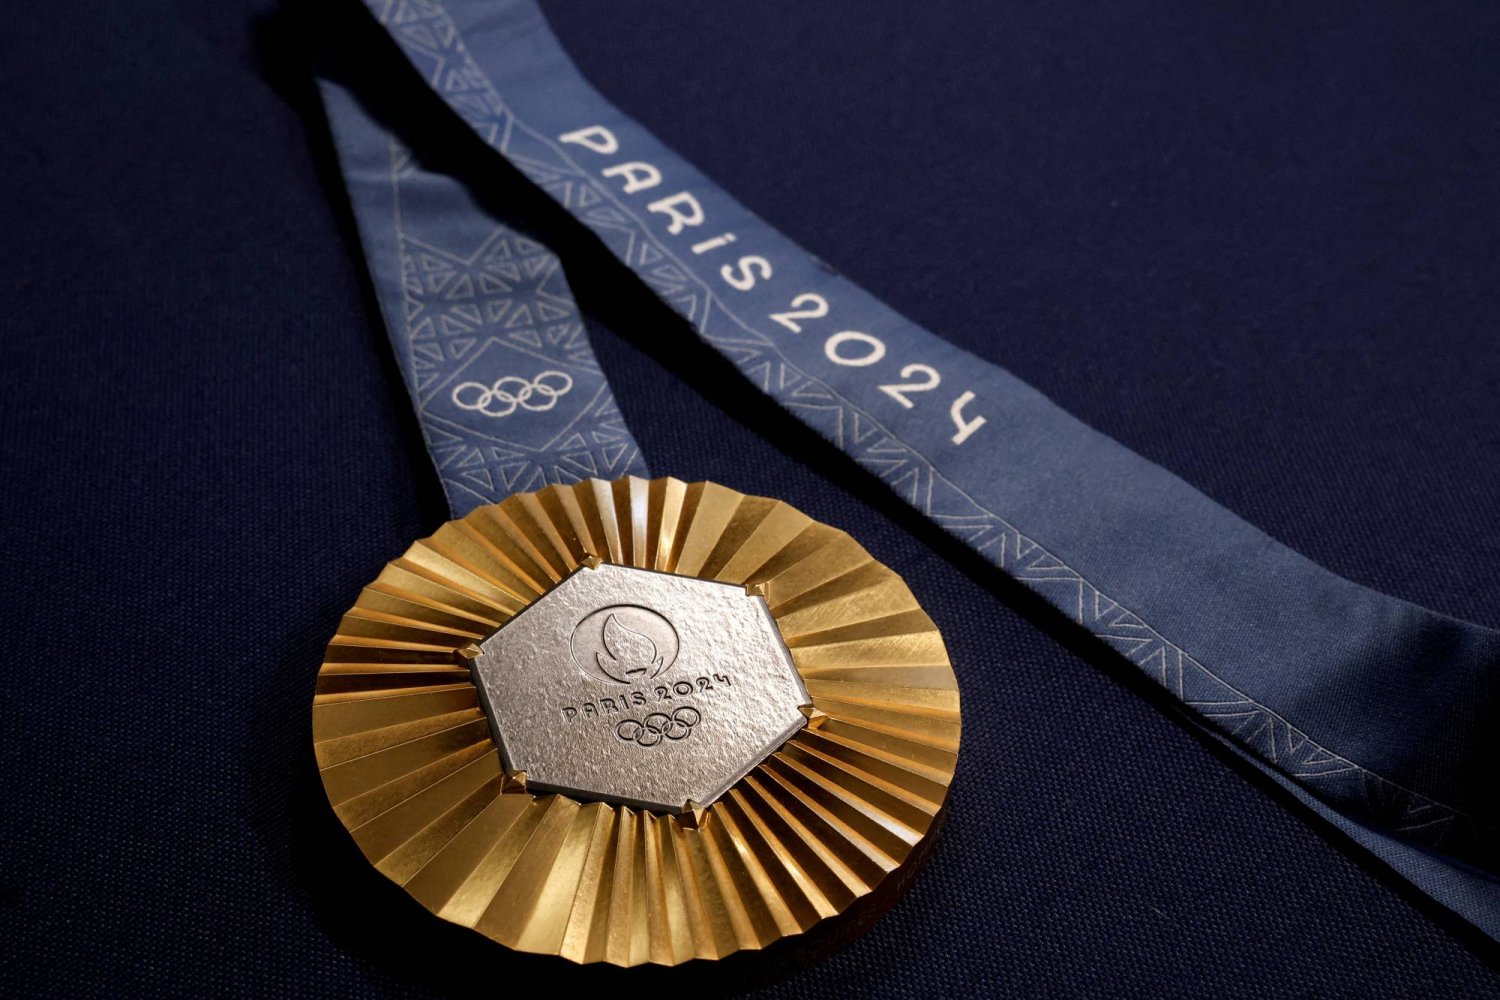 FILE PHOTO: Paris 2024 Olympics Medal Preview - Chaumet, Paris, France - February 1, 2024 A Paris 2024 Olympic Games gold medal is seen on display at Chaumet jewelry REUTERS/Benoit Tessier/File Photo/File Photo